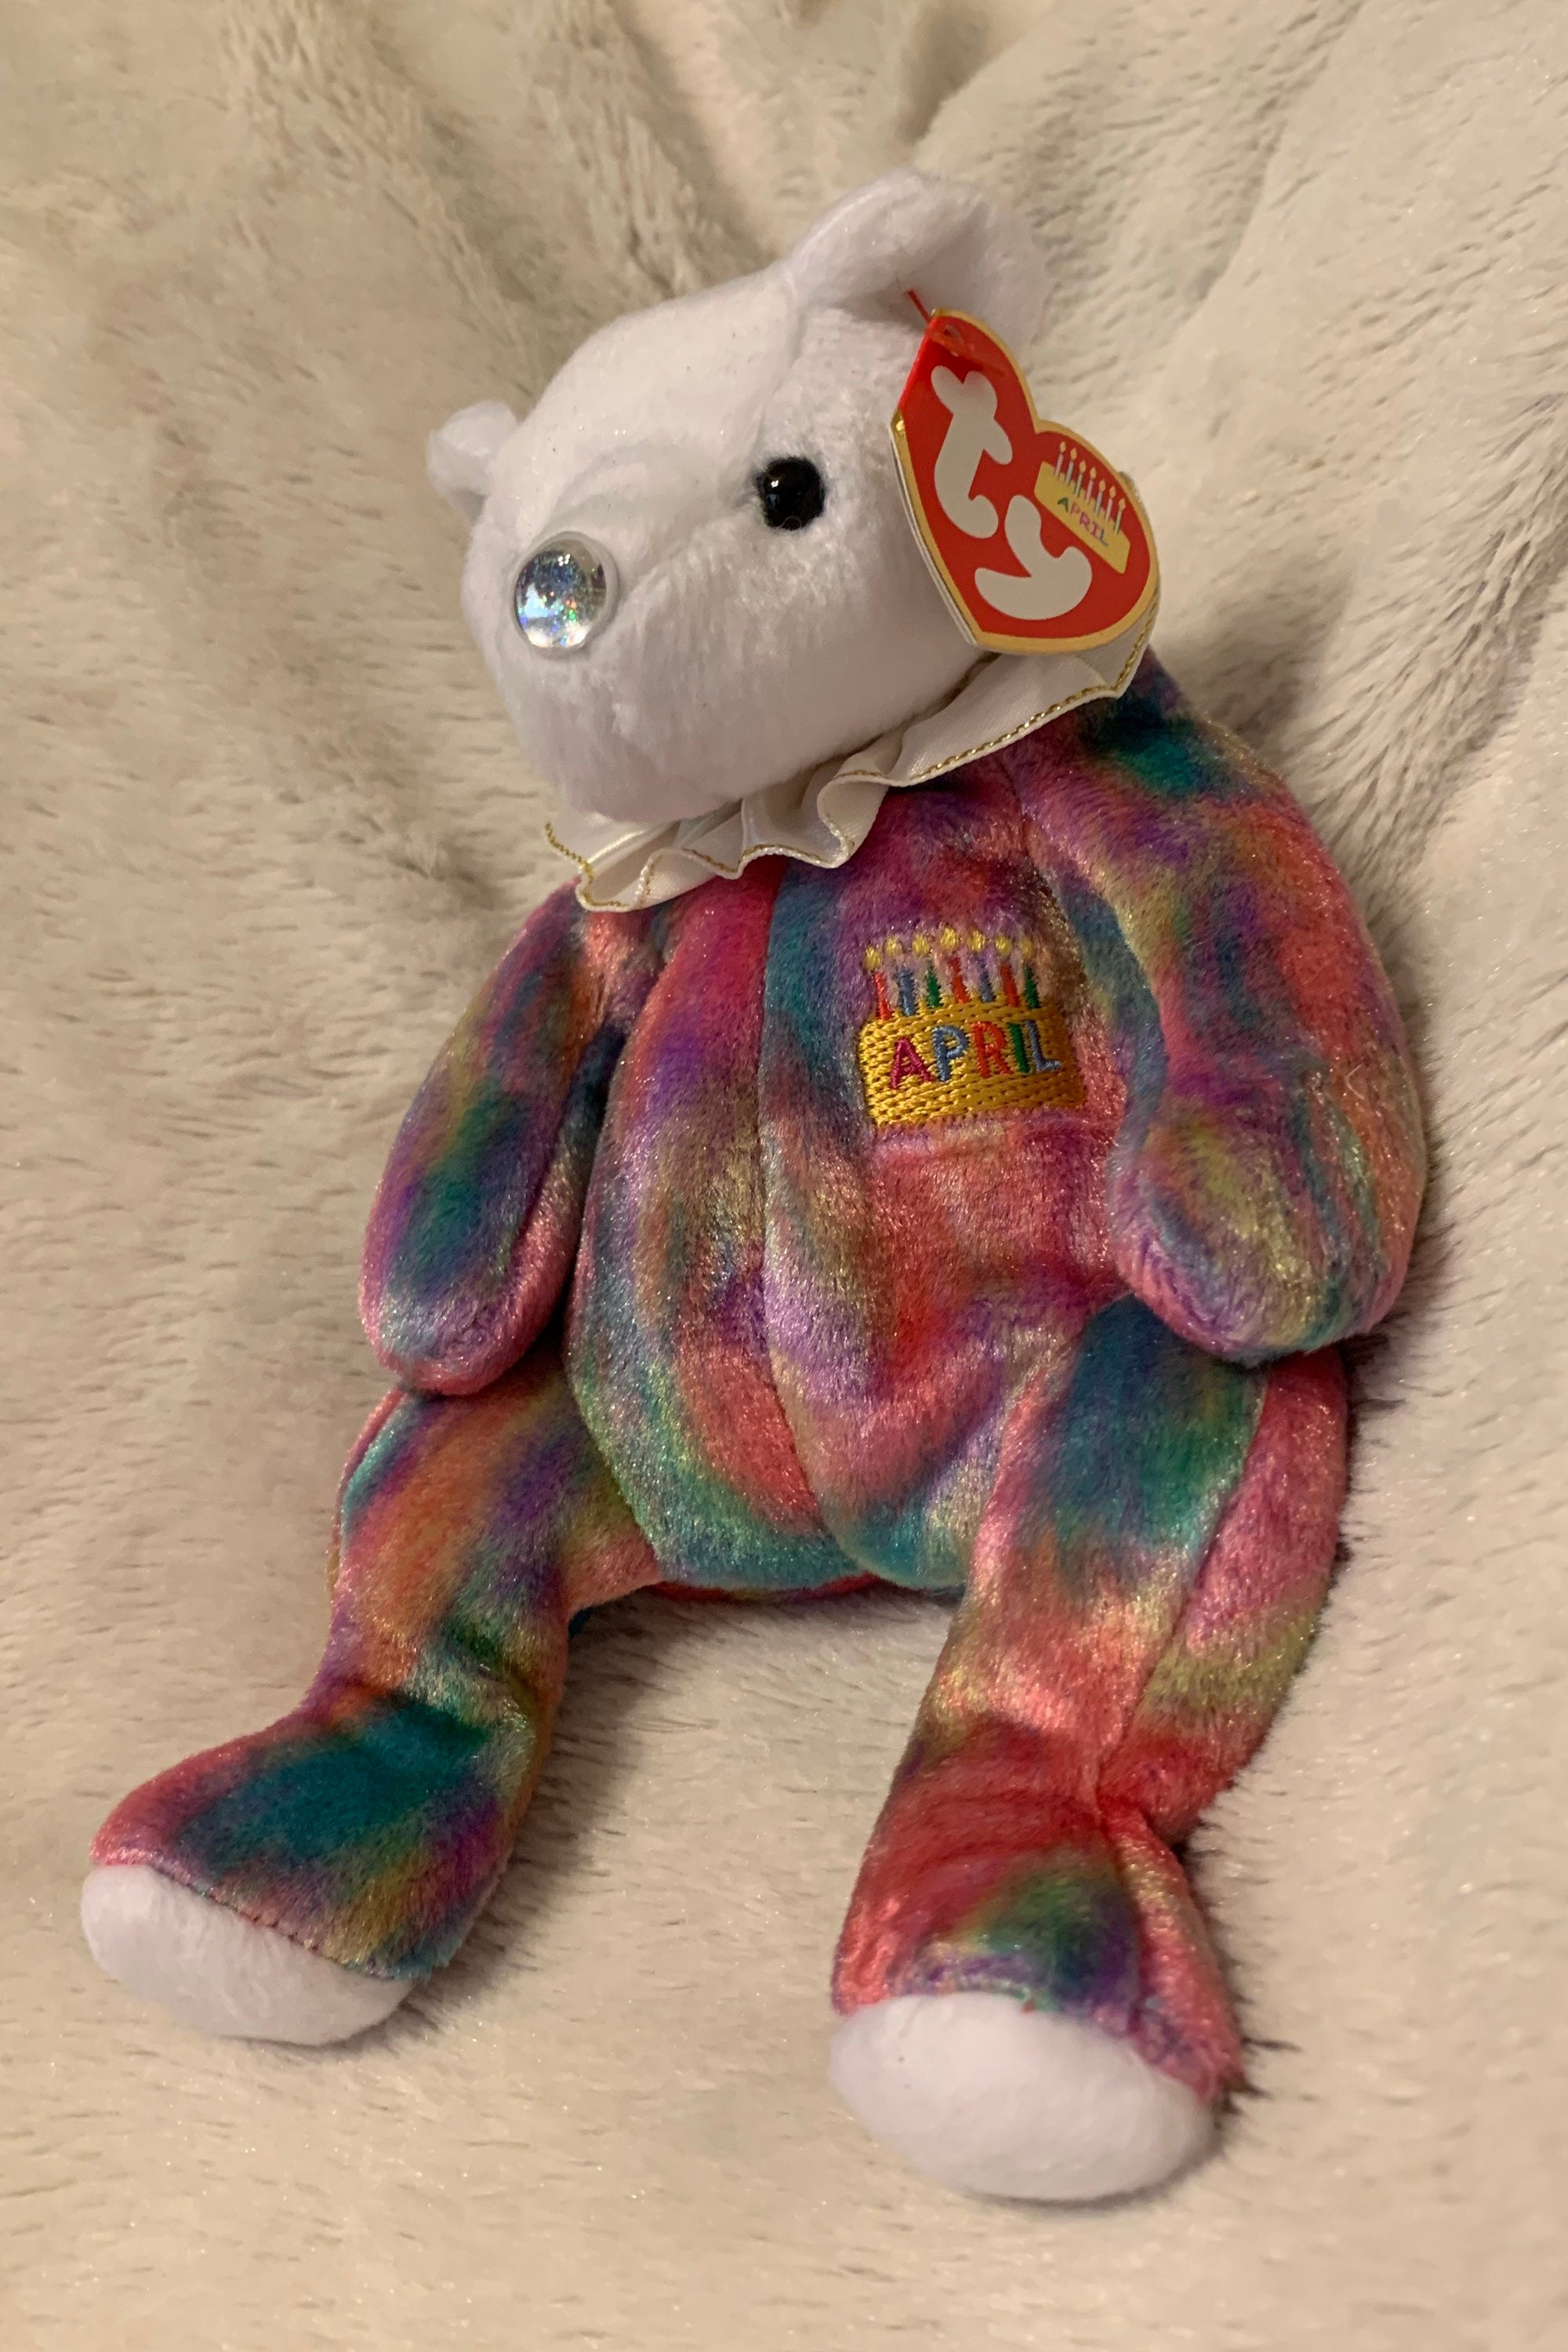 2001 Ty Beanie Baby Babies Original April Birthday Bear 1st Series Retired 4391 for sale online